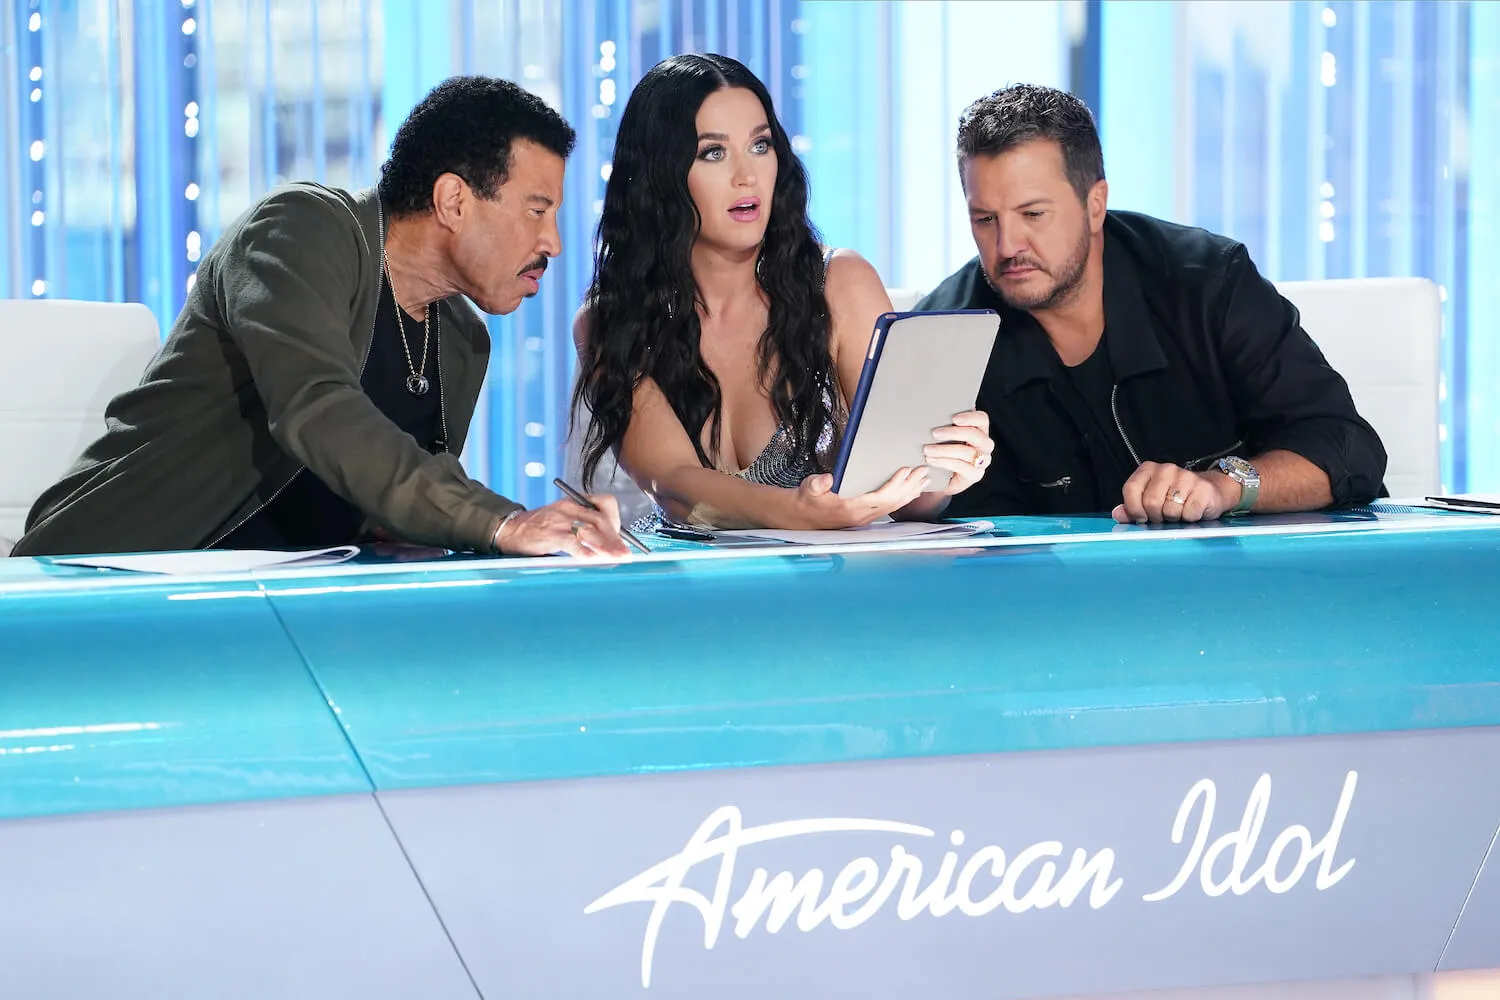 Lionel Richie, Katy Perry, and Luke Bryan looking at a piece of paper together on 'American Idol.' Perry looks shocked.